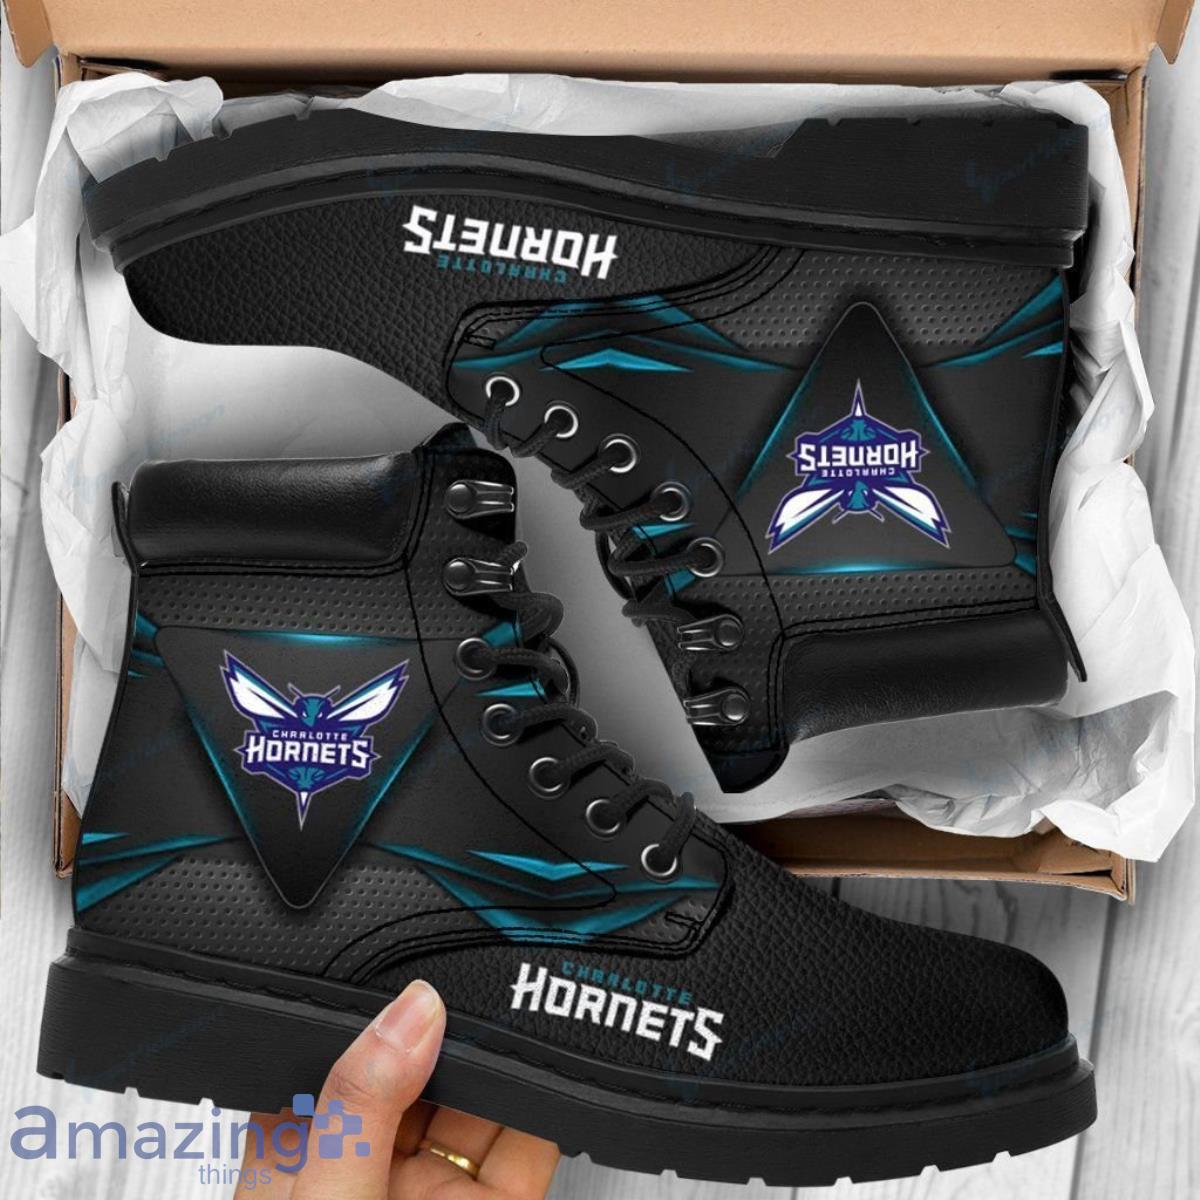 Charlotte Hornets Football Team Leather Boots For Men Women Special Gift For Fans Product Photo 1